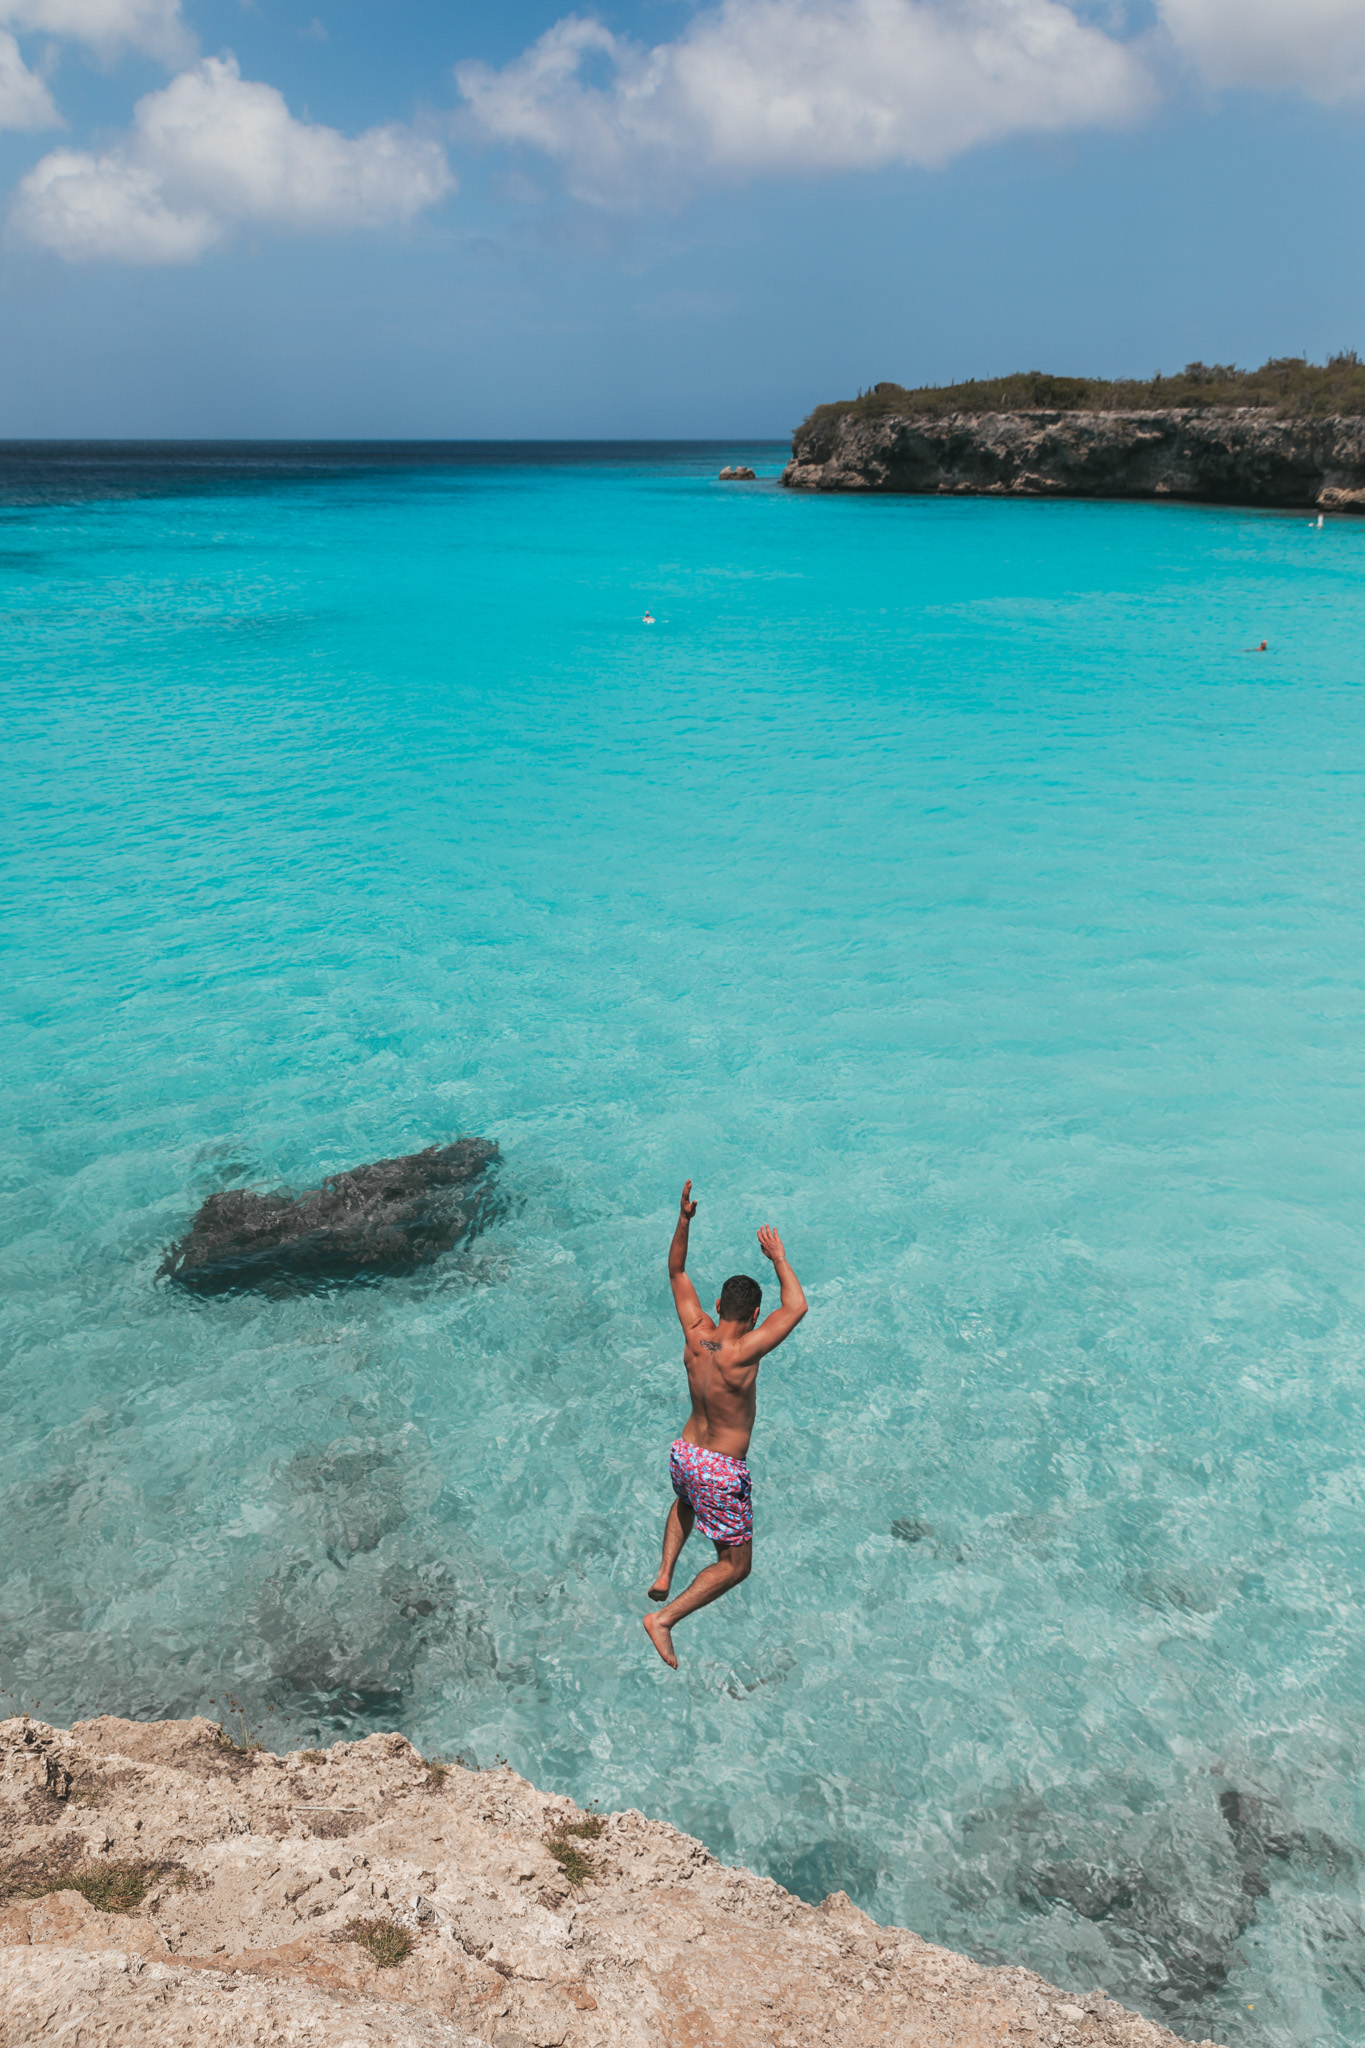 Cliff jumping at Playa Knip on Curaçao // 20 Photos to Show You Why Curaçao Needs to Be On Your Travel Radar // www.readysetjetset.net #readysetjetset #curacao #caribbean #beach #ocean #paradise #travel